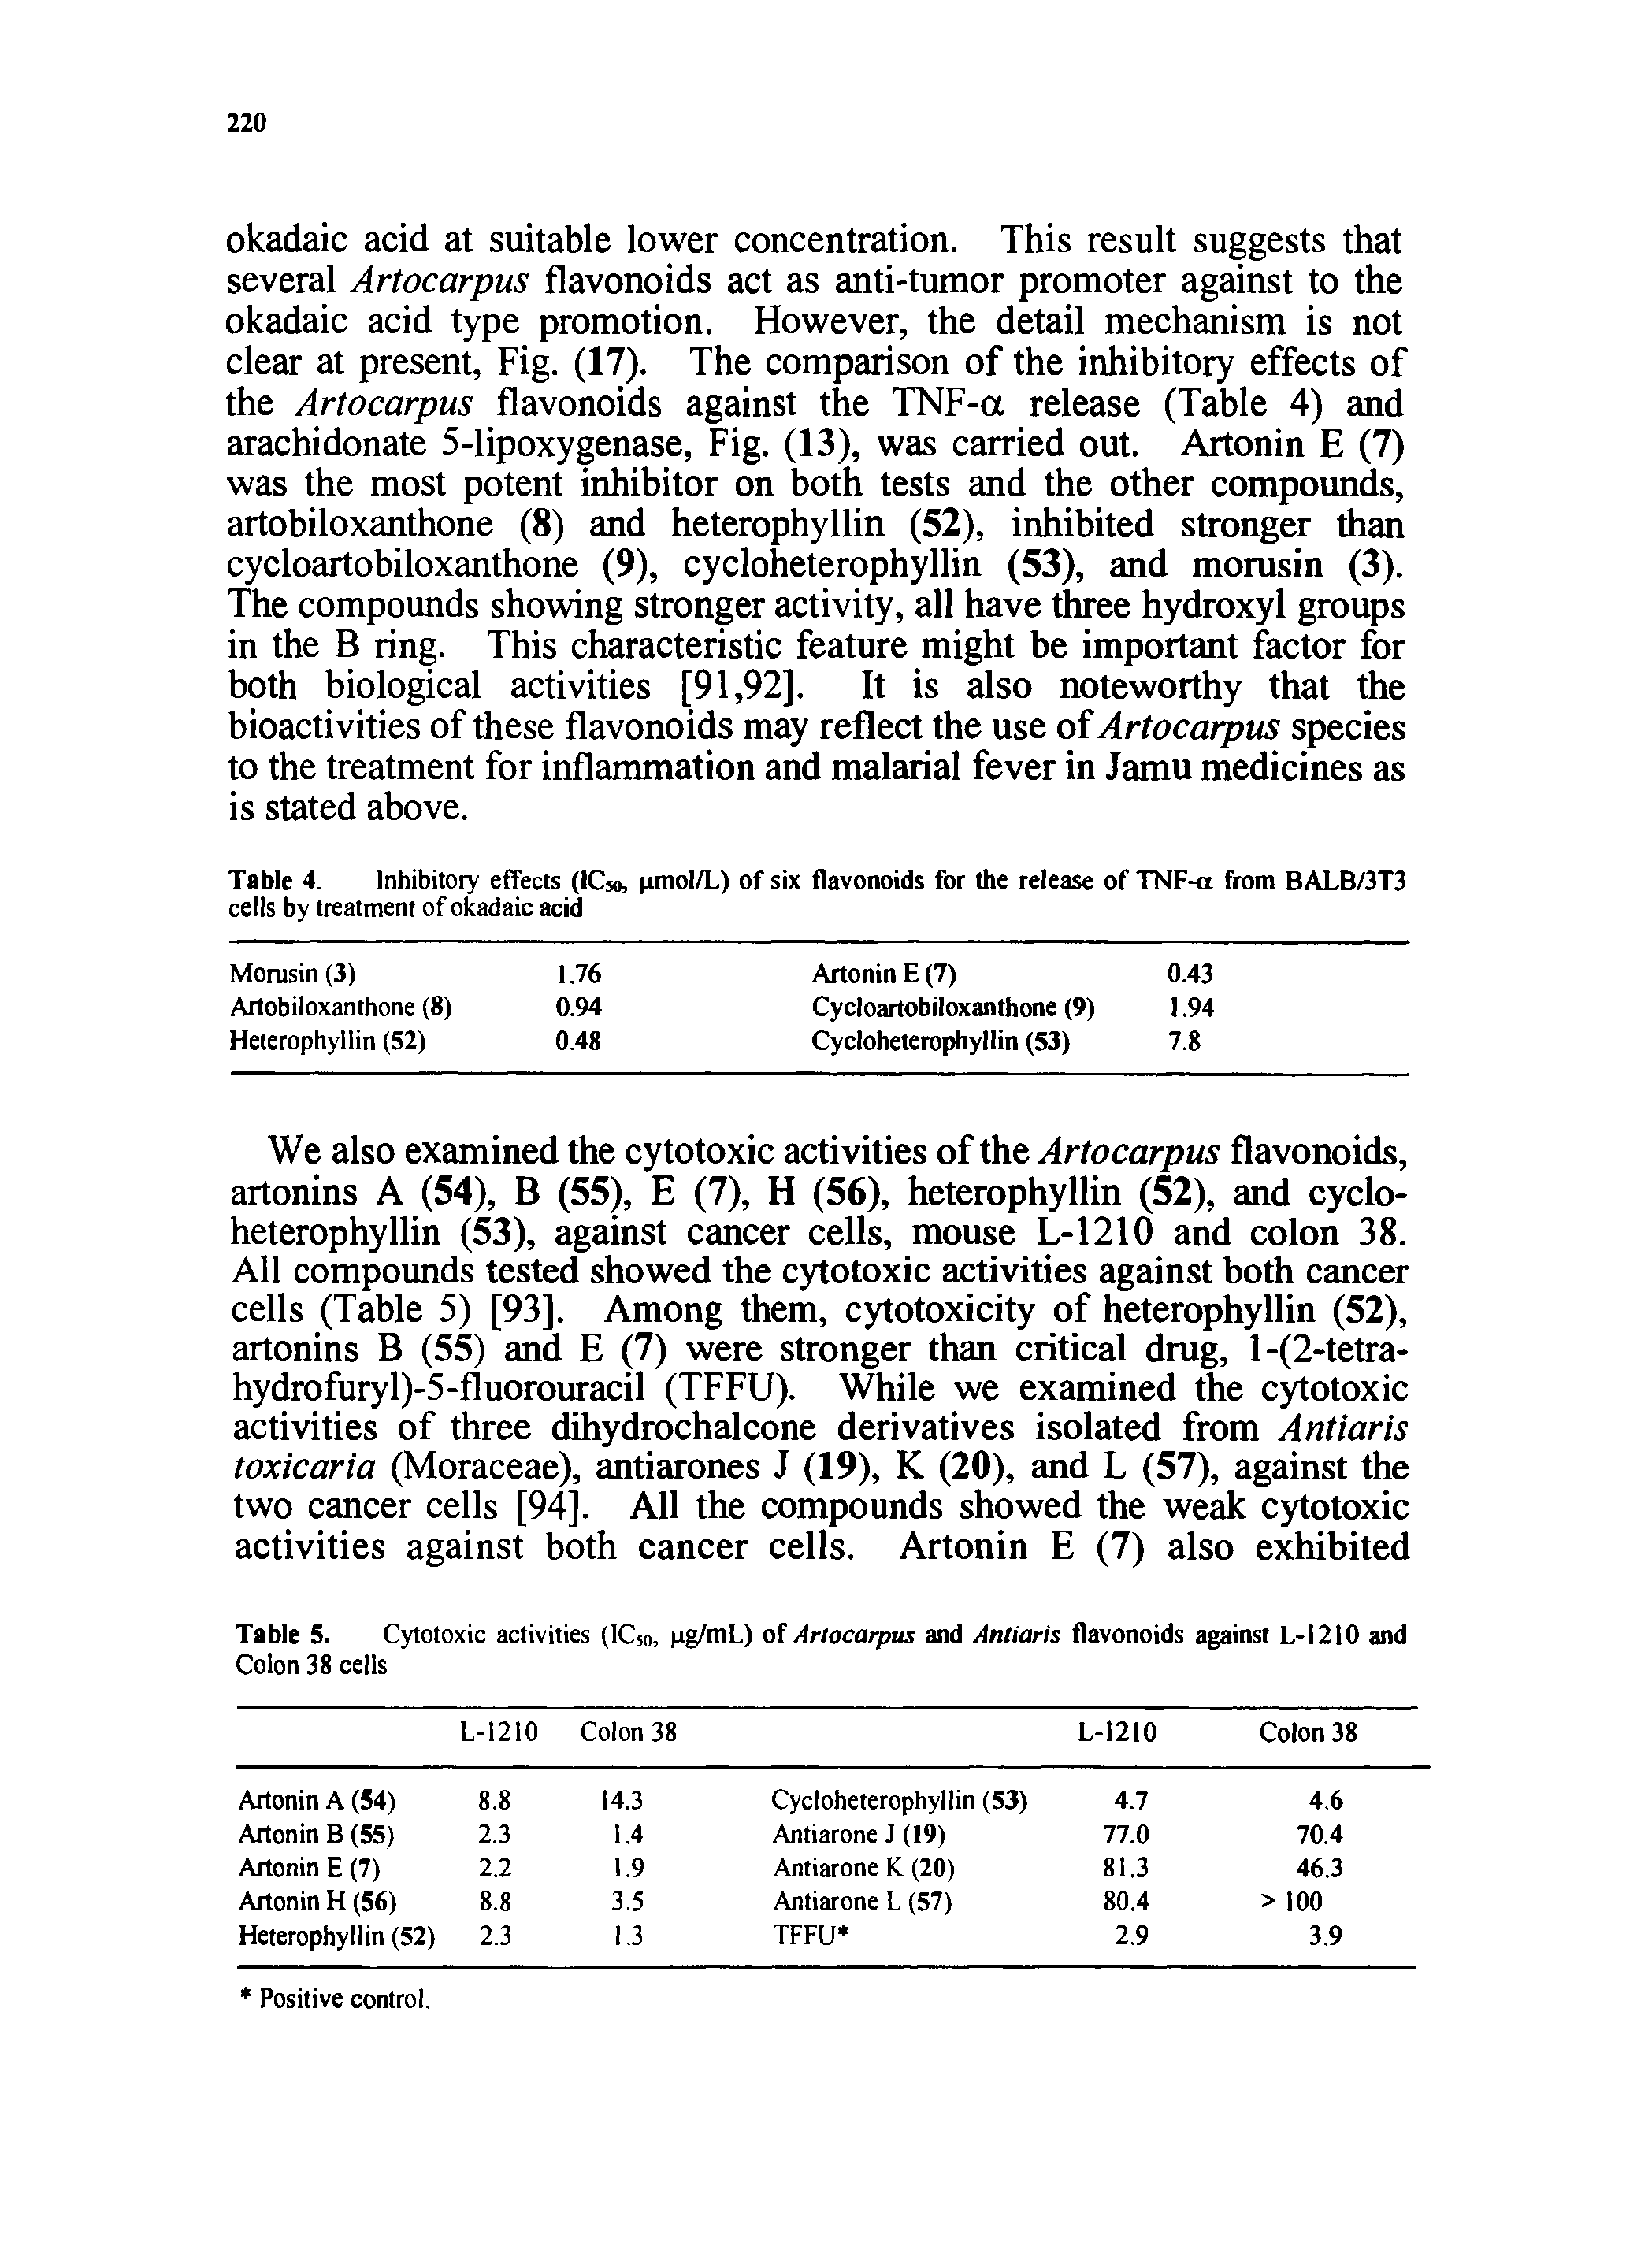 Table 4. Inhibitory effects (1C , pmol/L) of six flavonoids for the release of TNF-a from BALB/3T3 cells by treatment of okadaic acid...